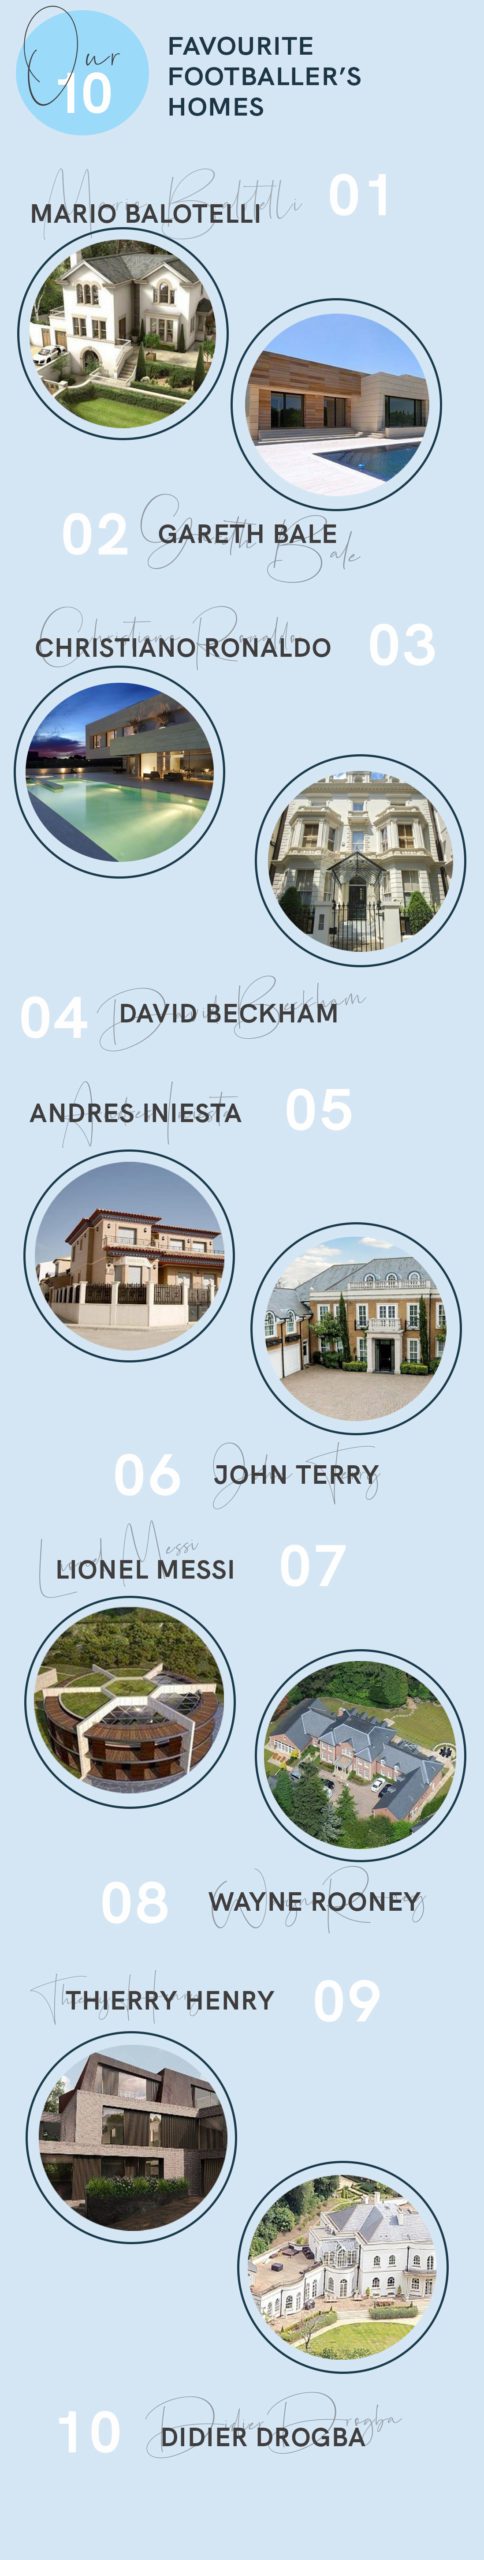 Our Top Ten Favourite Footballer’s Homes infographic